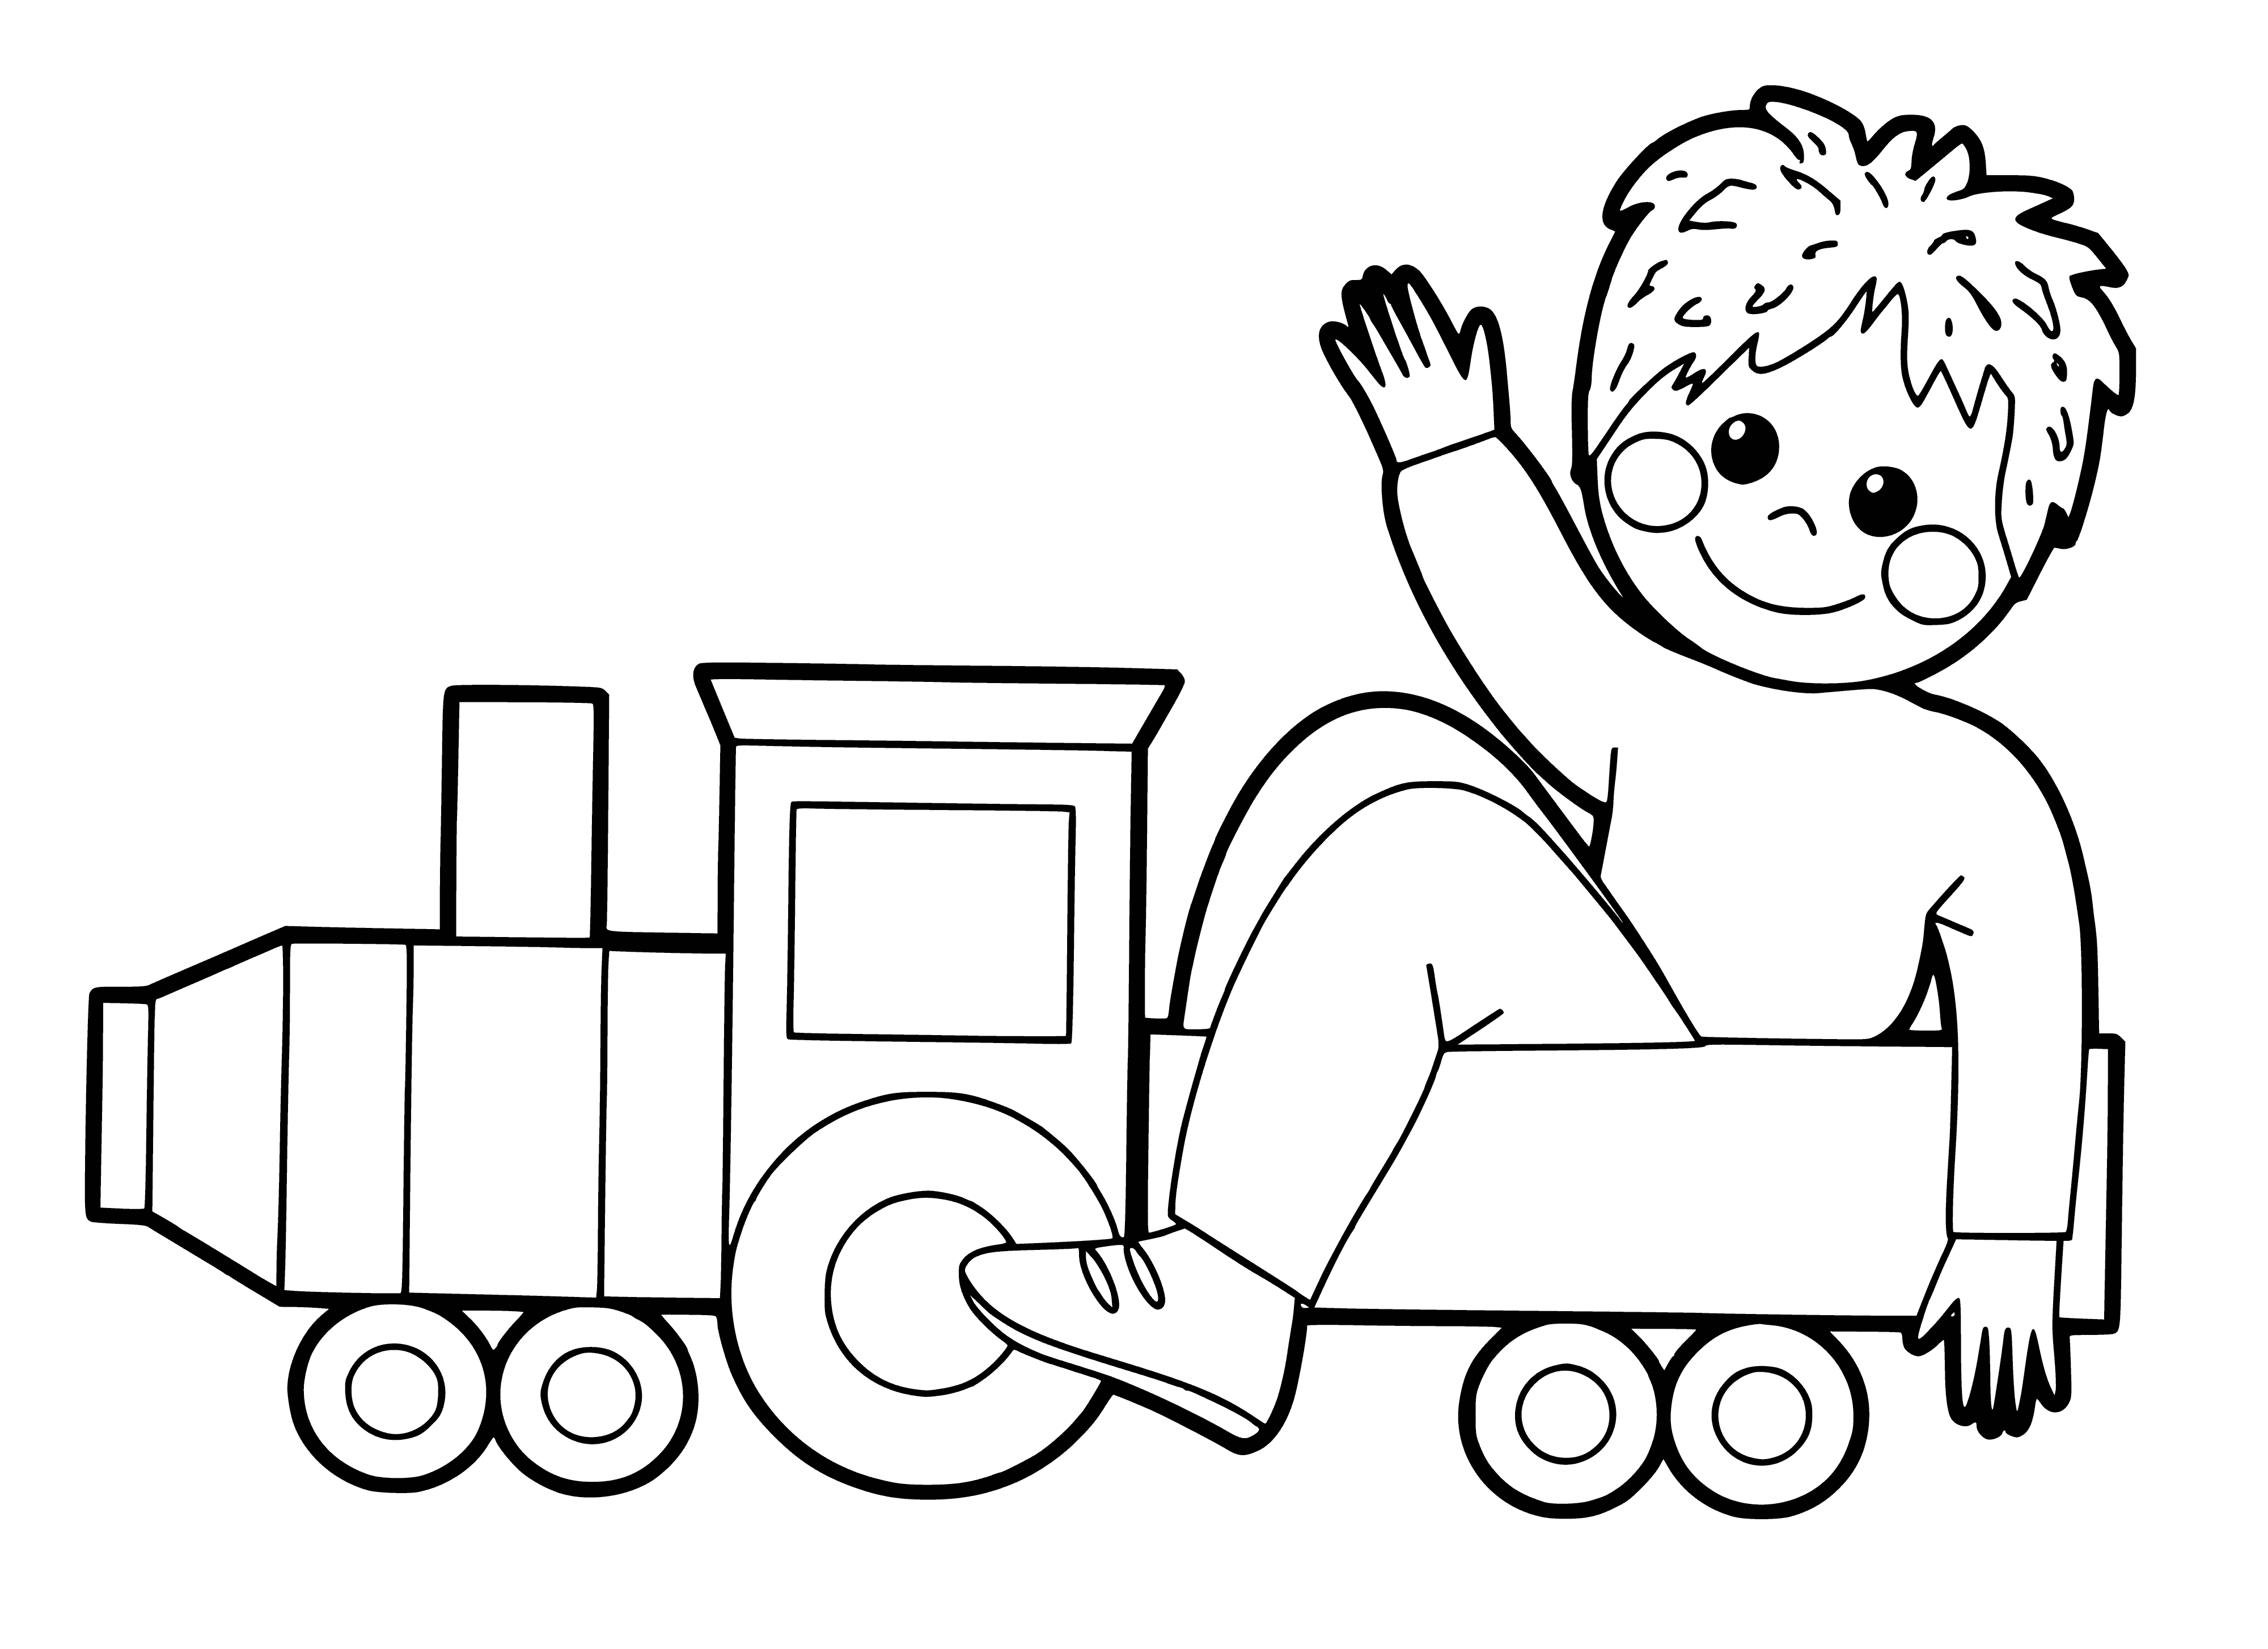 coloring page: 2 vehicles, car pulling trailer, driver's seats & steering wheels, car w/ windshield, truck w/ metal grill, 4 wheels. Coloring page simple for young children.